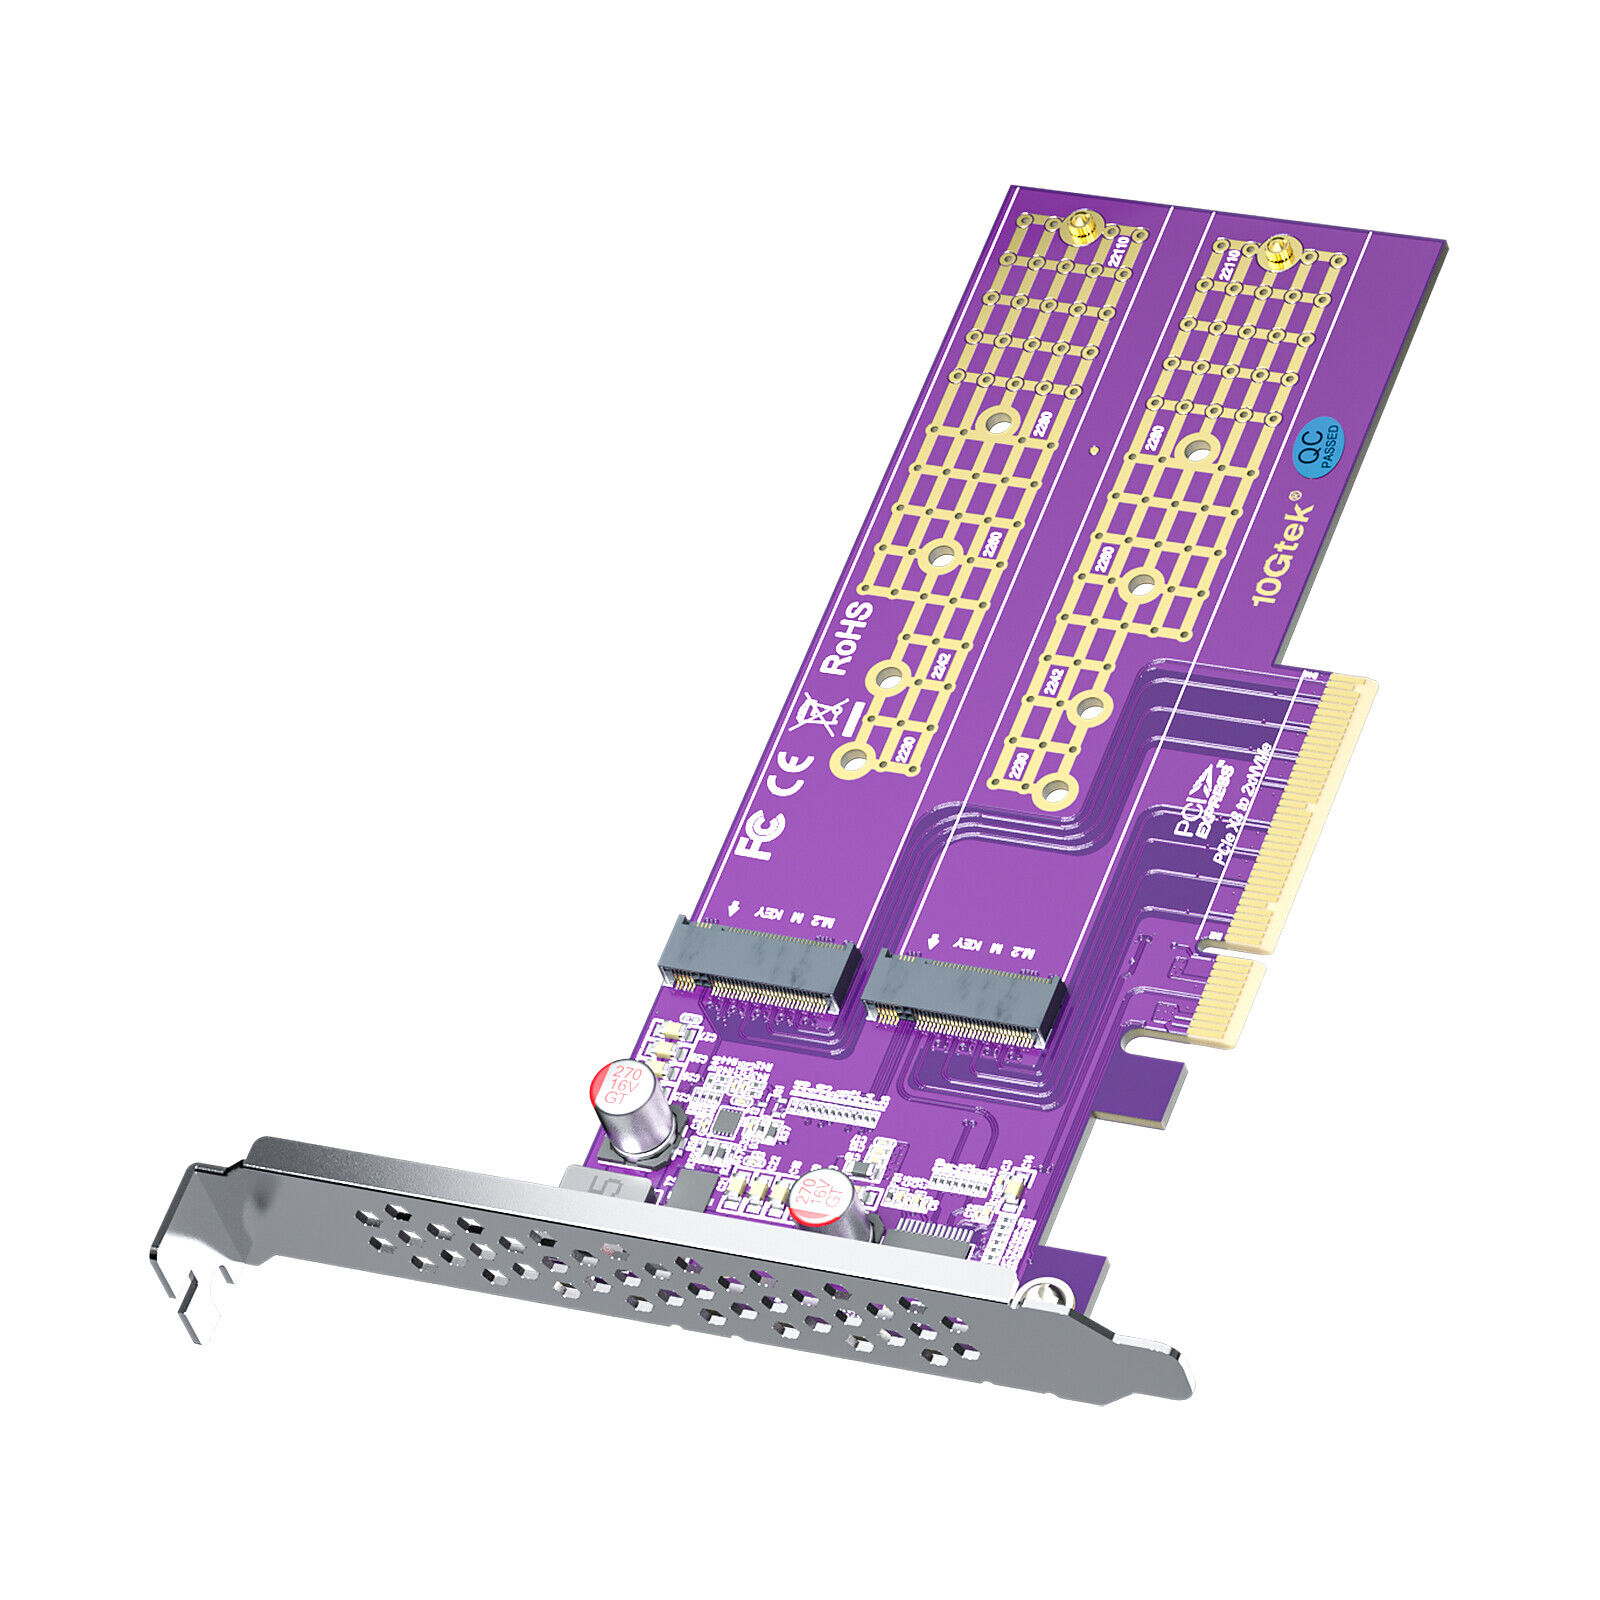 2 Ports M.2 M-Key to Desktop PCIe x8 NVMe SSD Adapter For 22110,2280,2260 drives